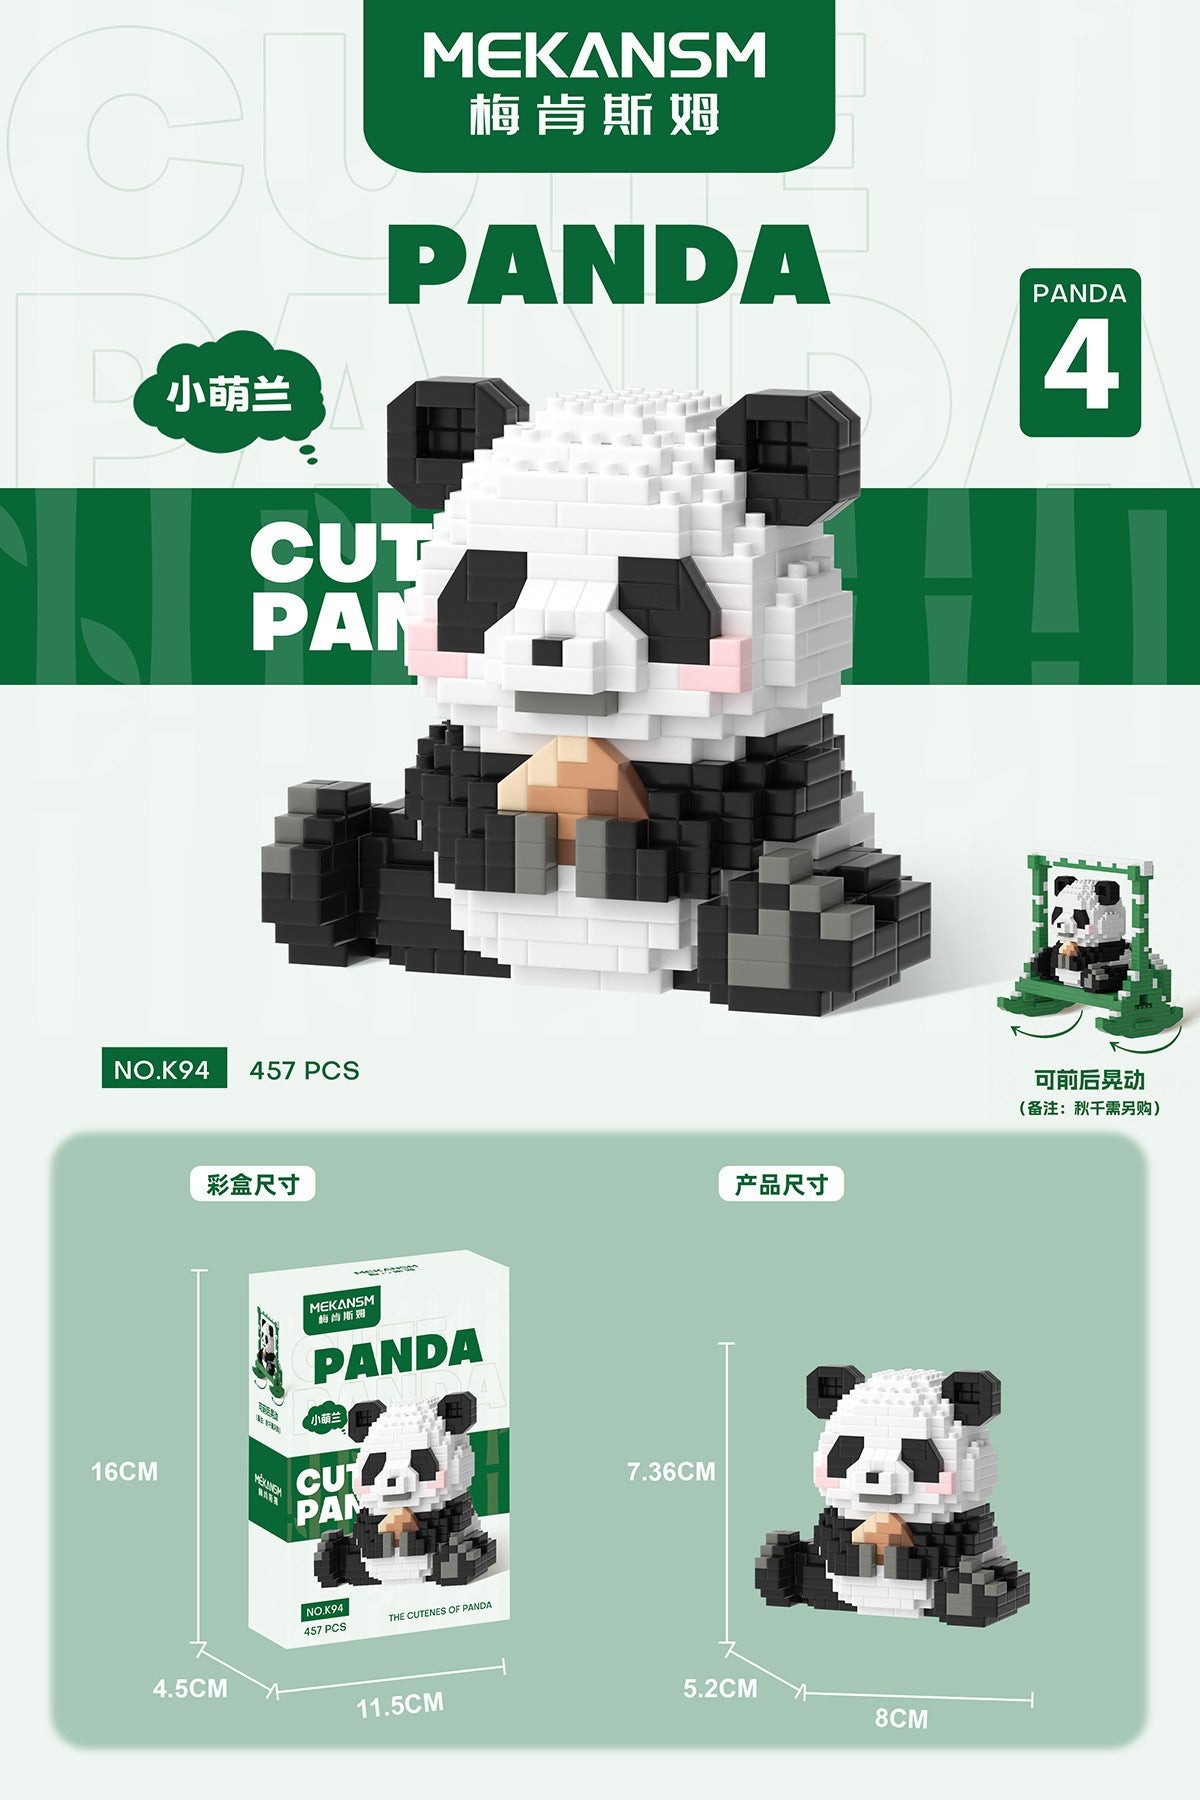 Hot selling Chinese building blocks, national treasures, panda flower micro particle assembly toys, gifts for boys and girls